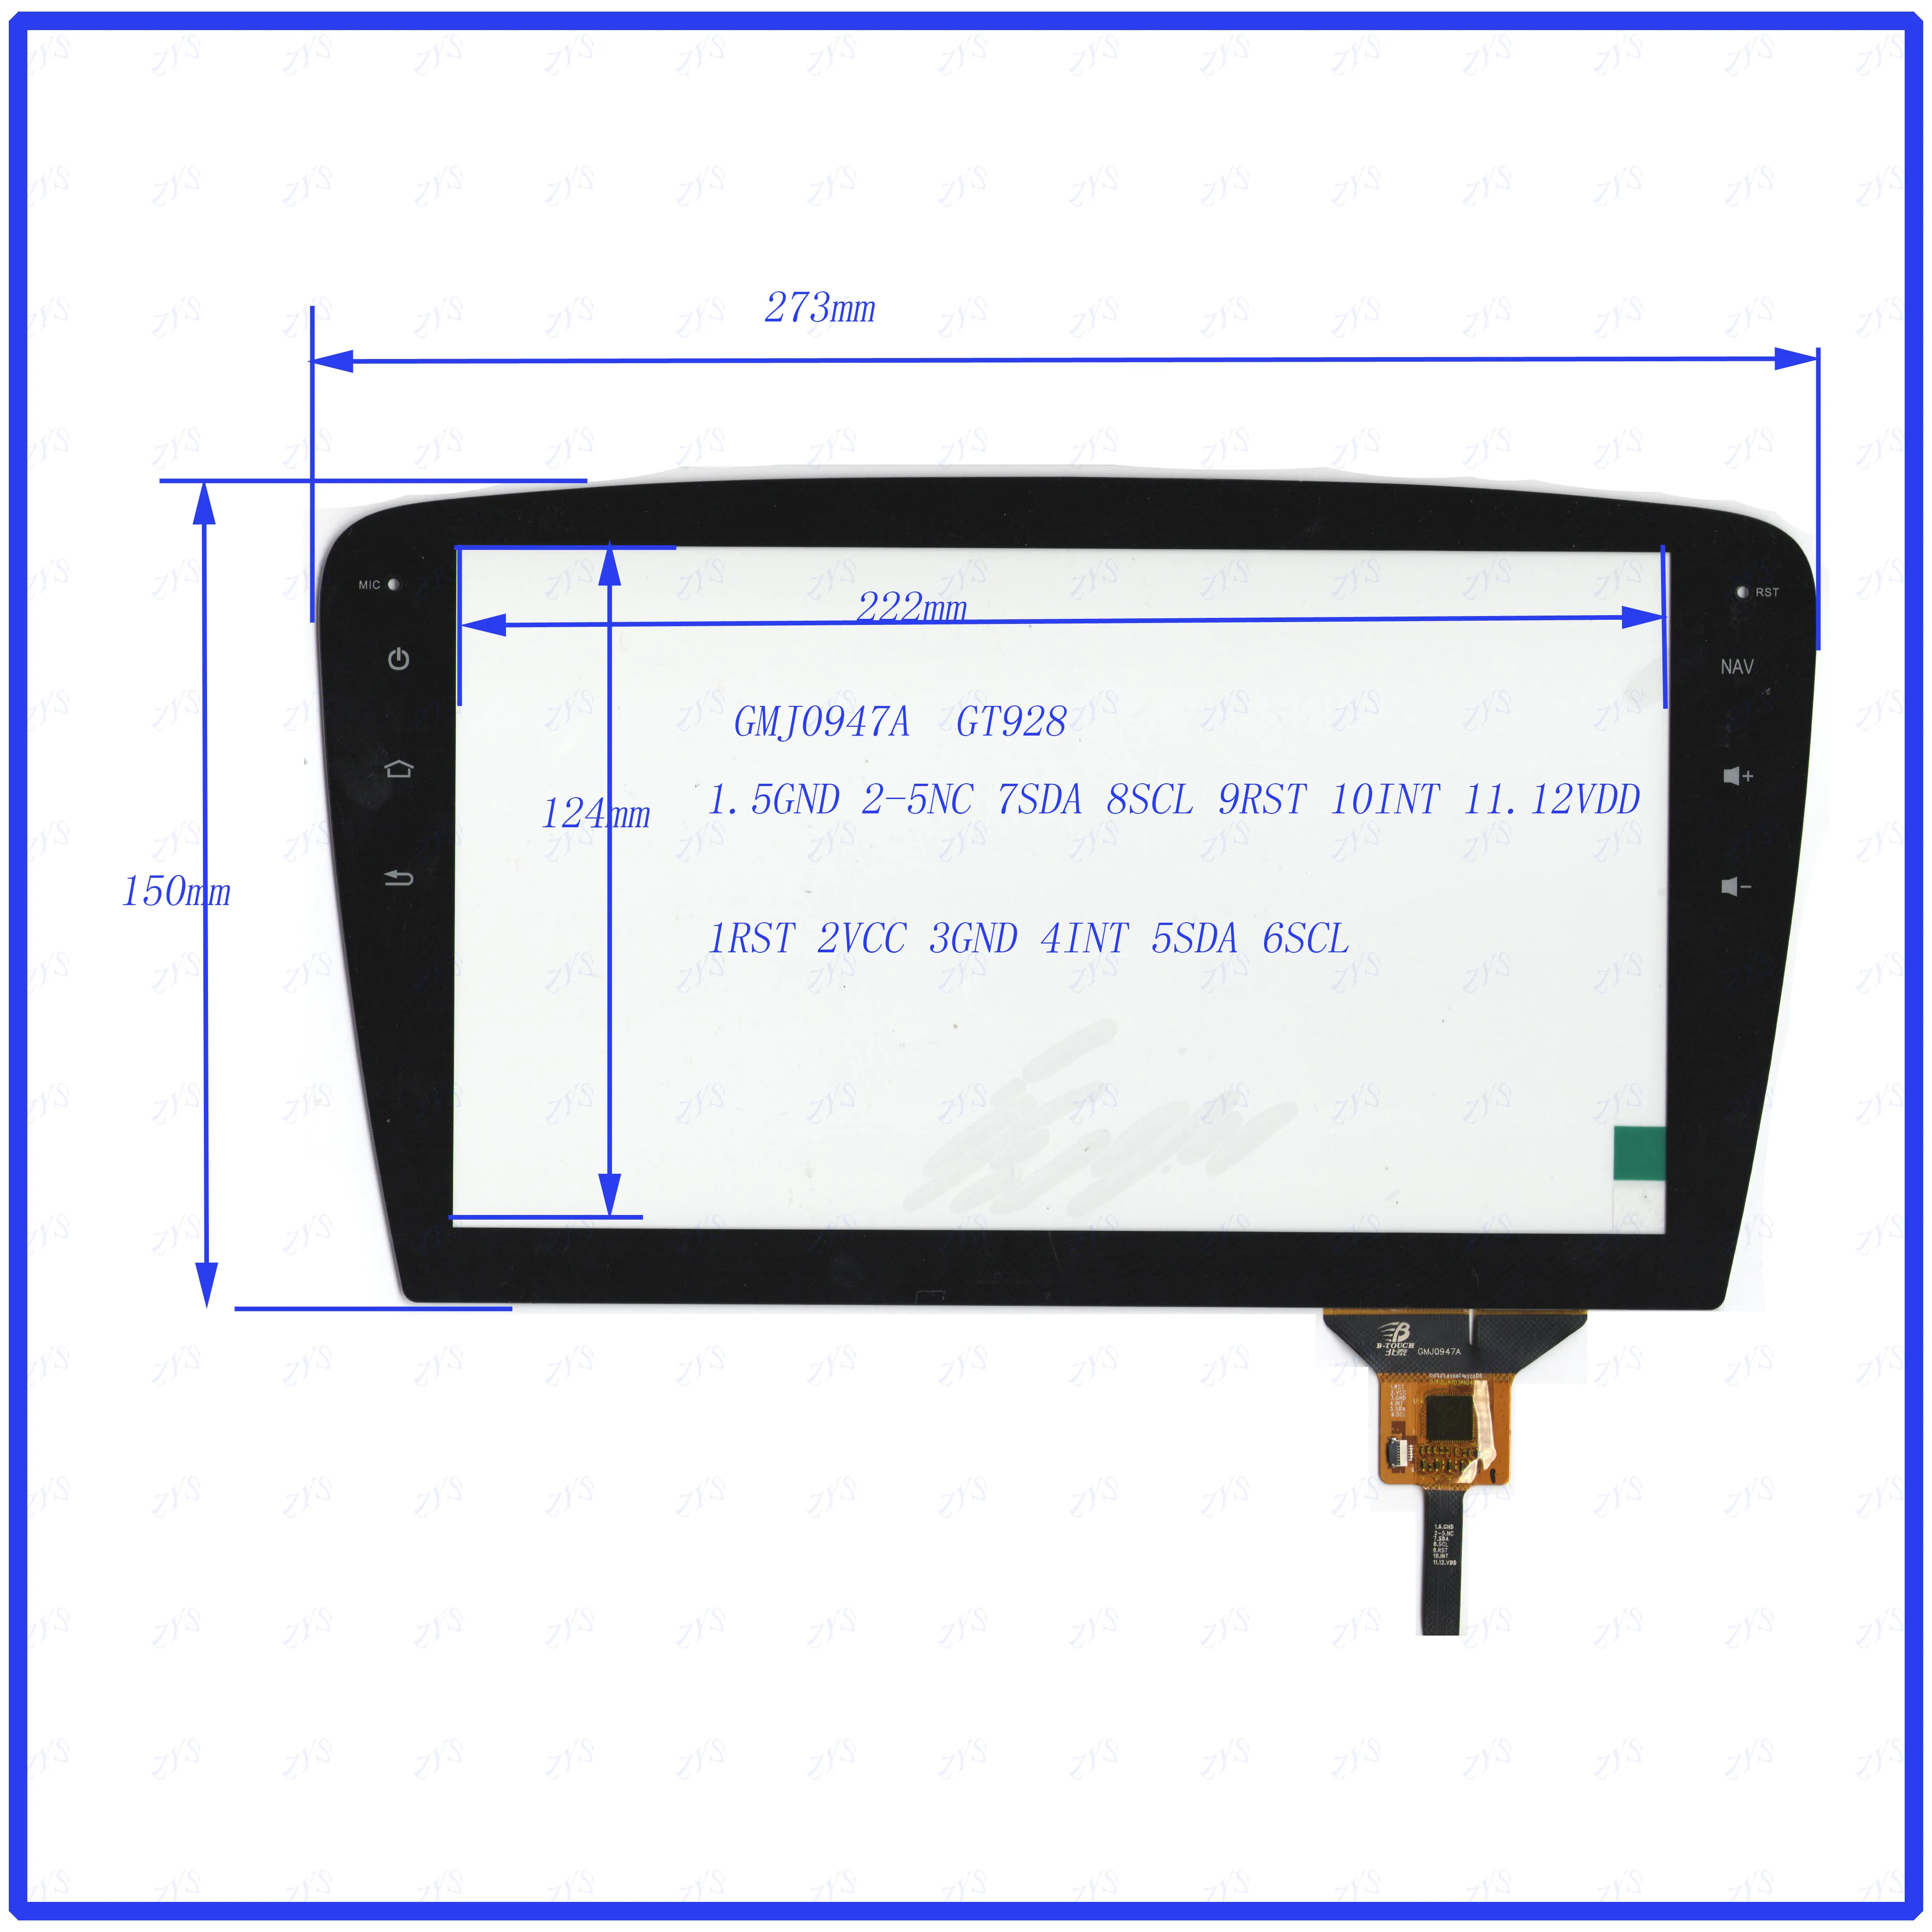 

GMJ047A GT928 capacitive for D60 screen compatible 273*150 touchglass screen this is compatible Touchsensor 273mm*150mm